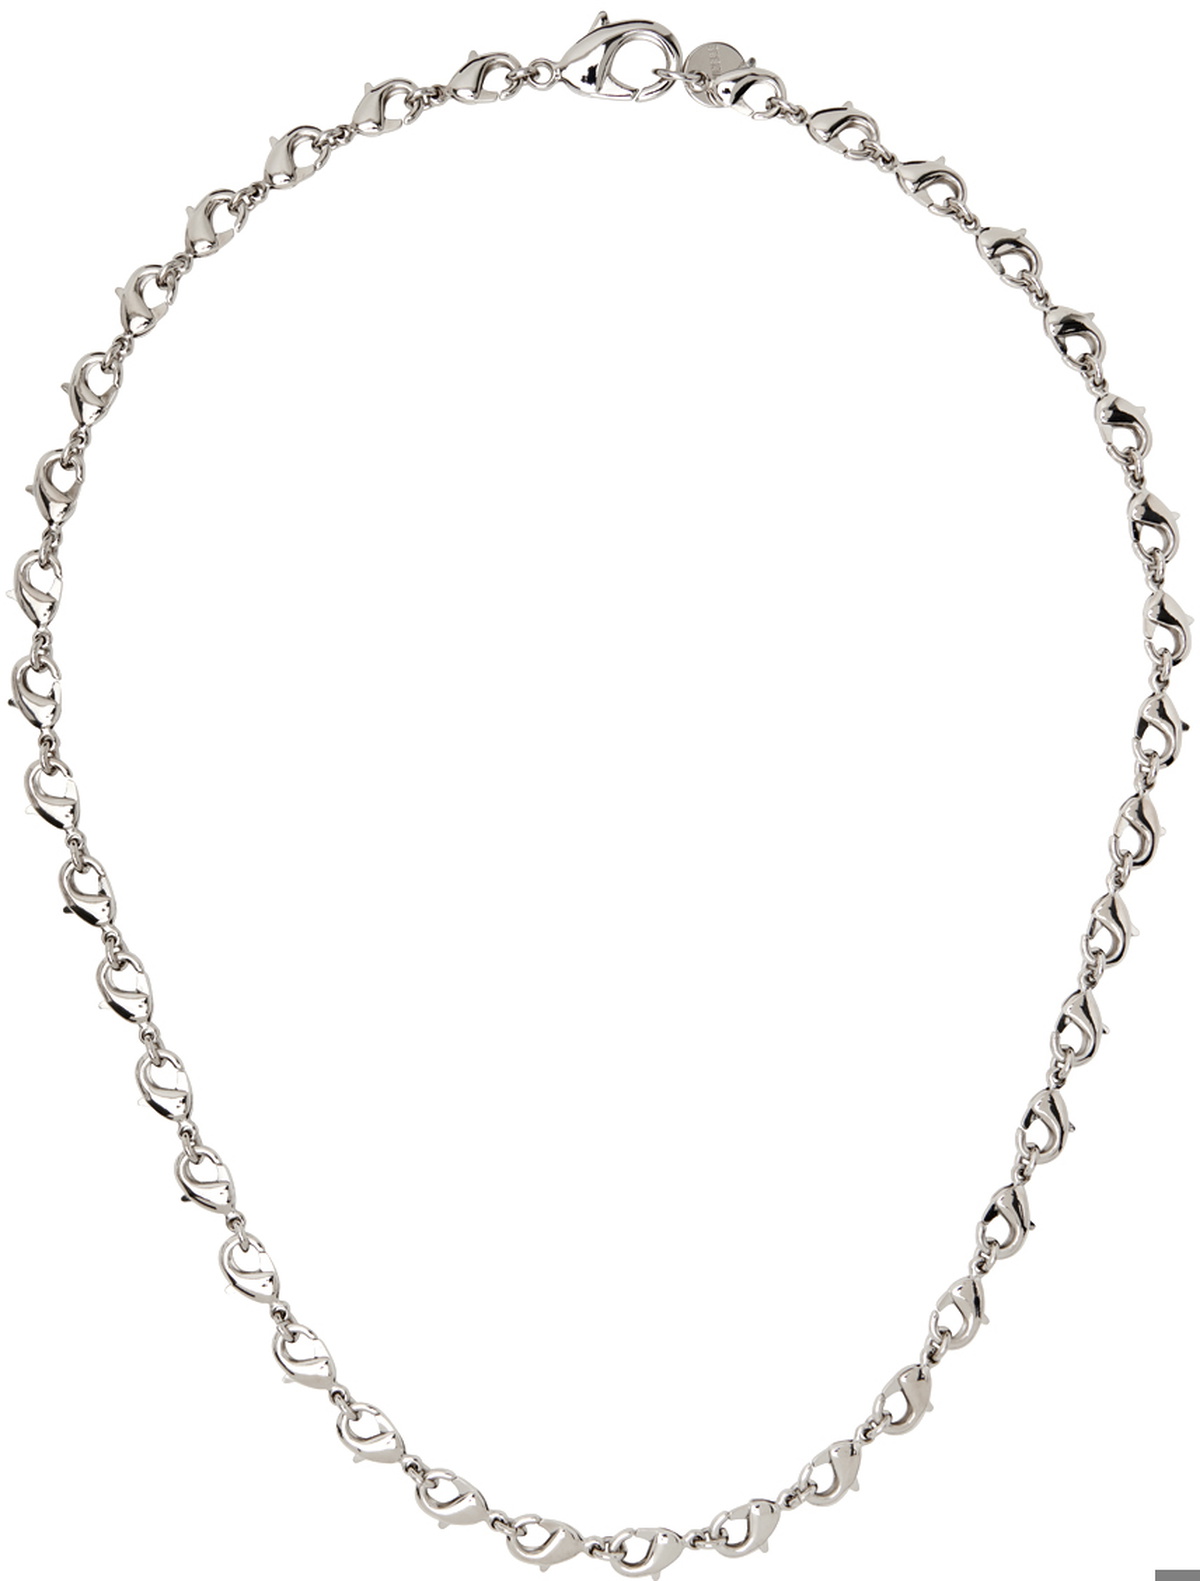 D'heygere Silver Clasp Necklace